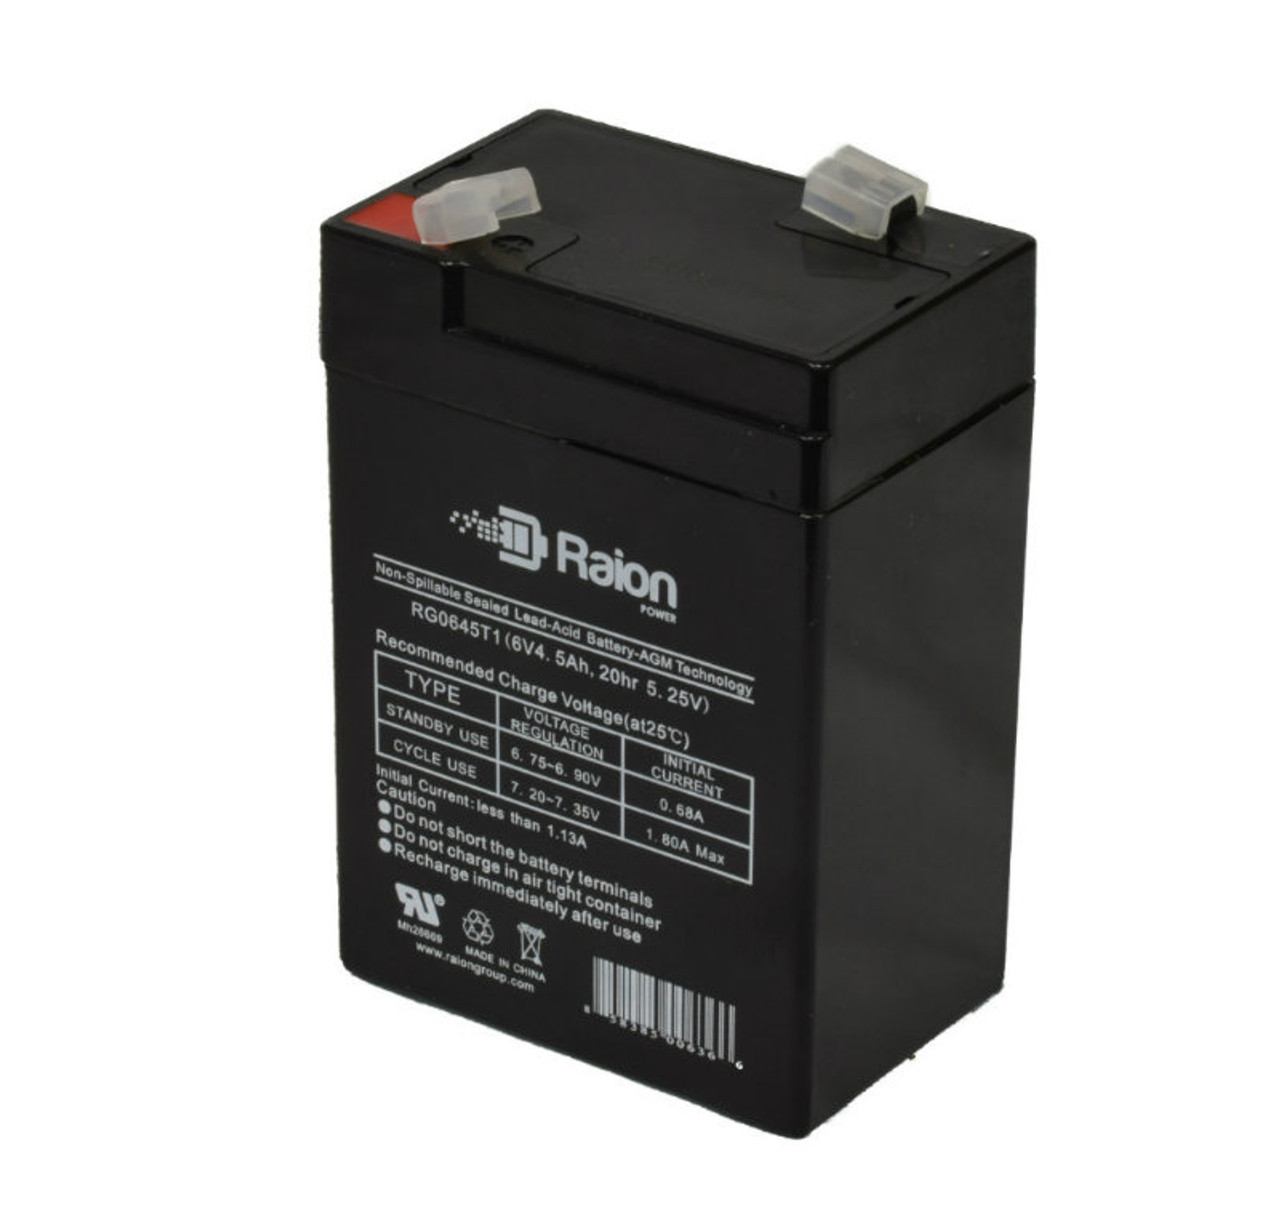 Raion Power RG0645T1 6V 4.5Ah Replacement Battery Cartridge for Chloride 1000010148